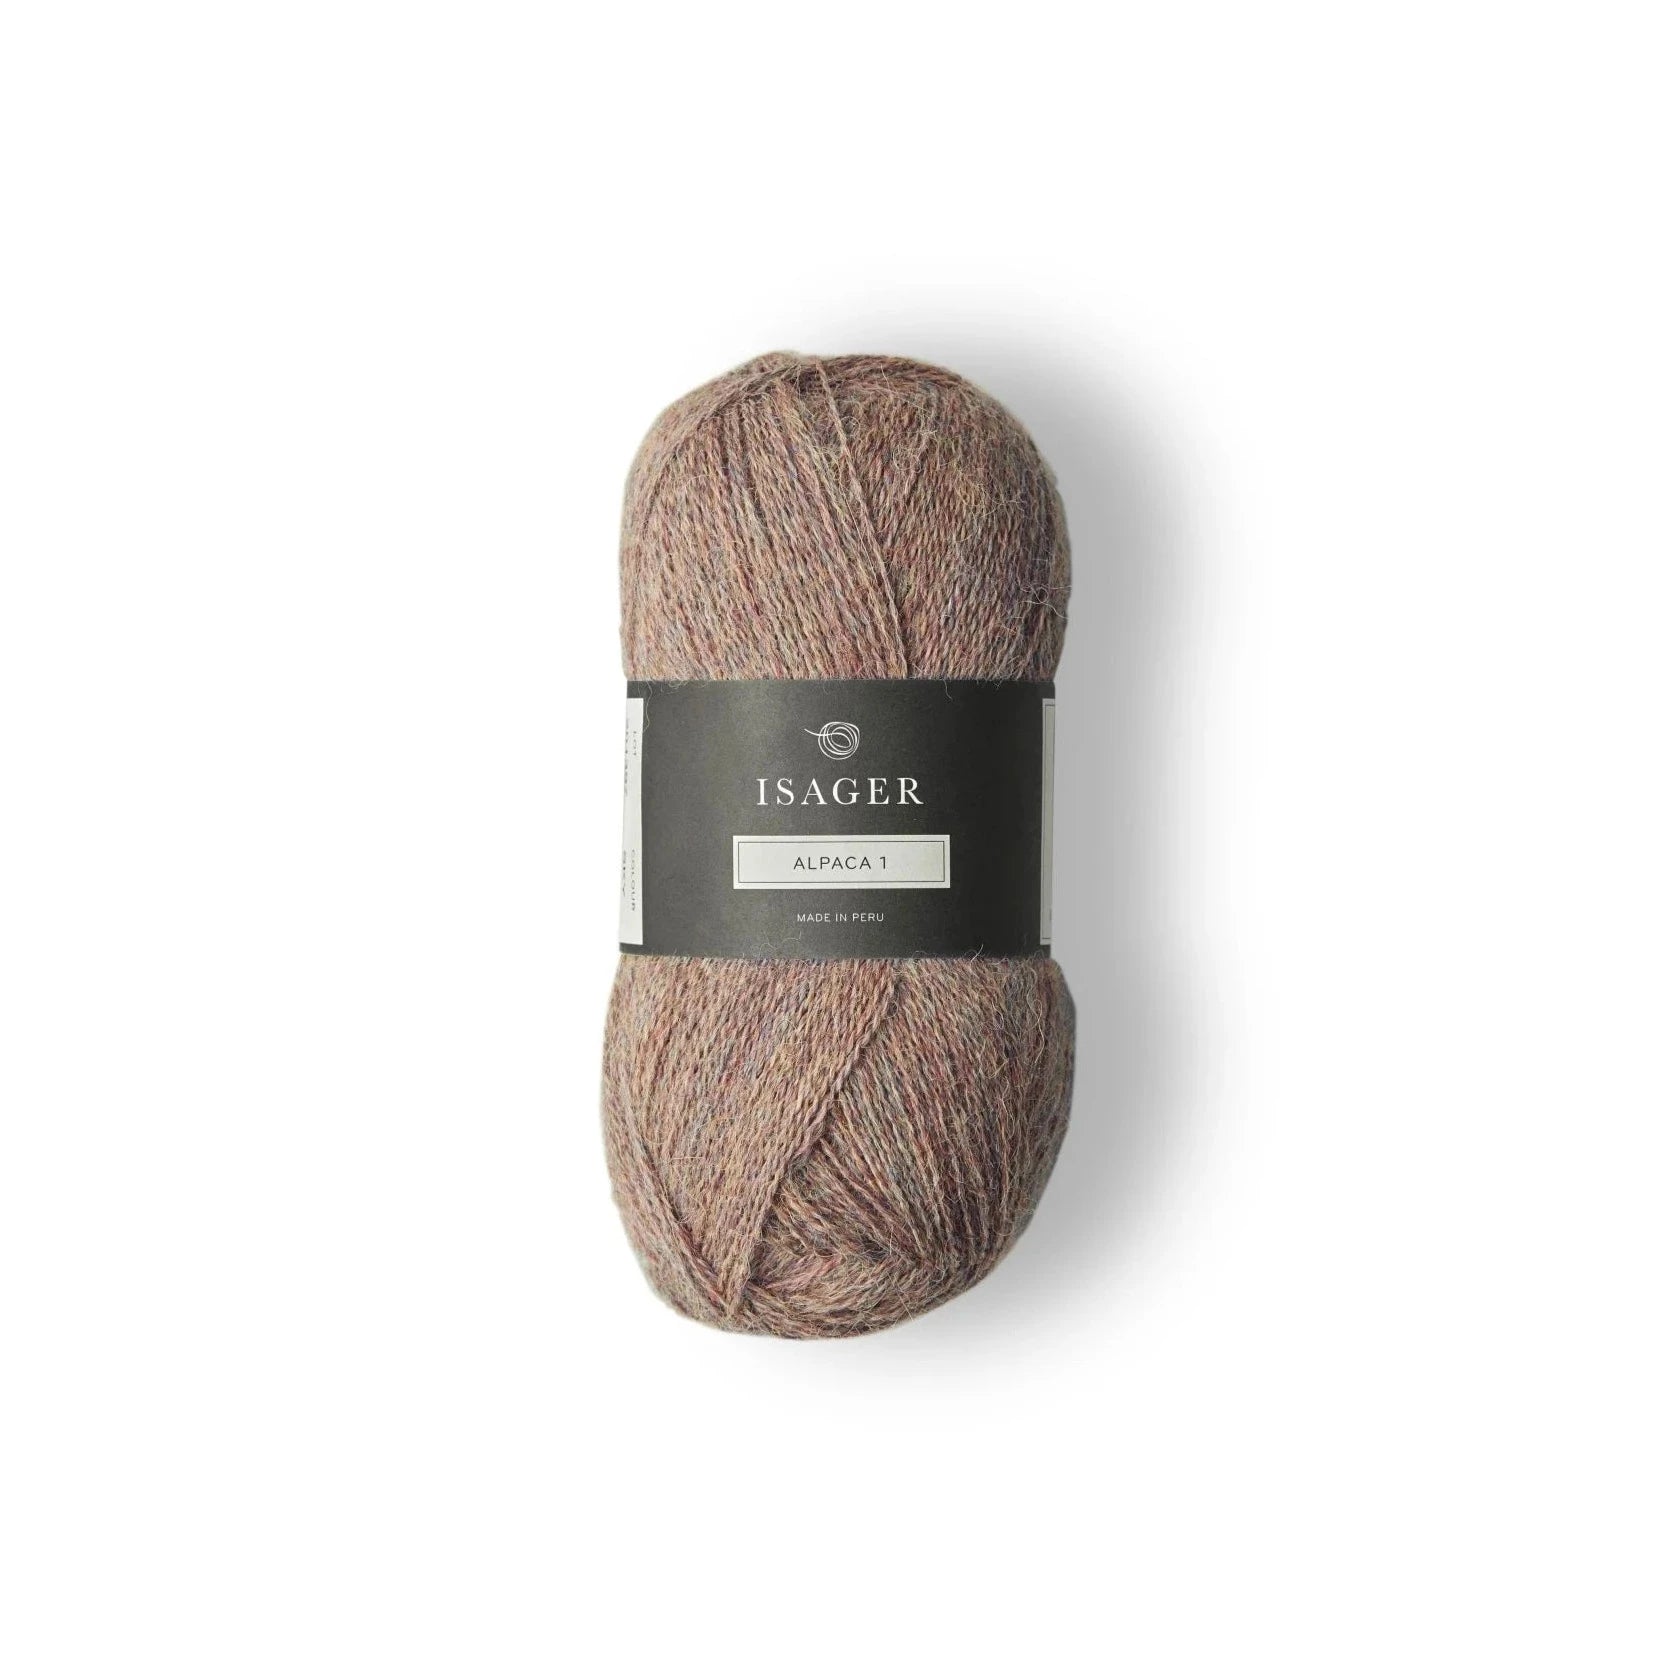 Isager Alpaca 1 - Isager - Sky - The Little Yarn Store